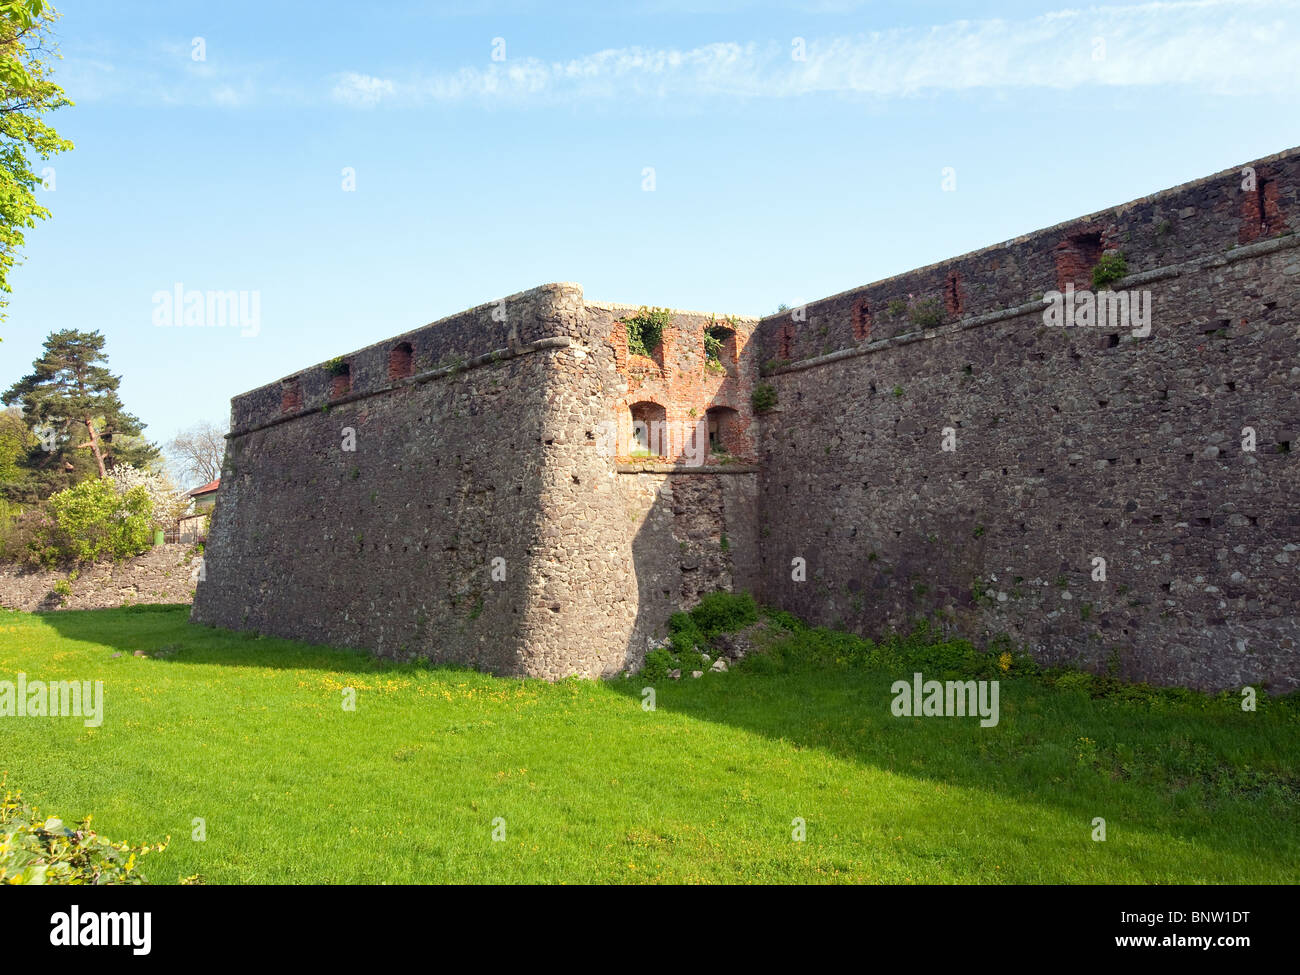 The bastions of Uzhhorod Castle (Ukraine). Built between the 13th and 18th centuries. Stock Photo